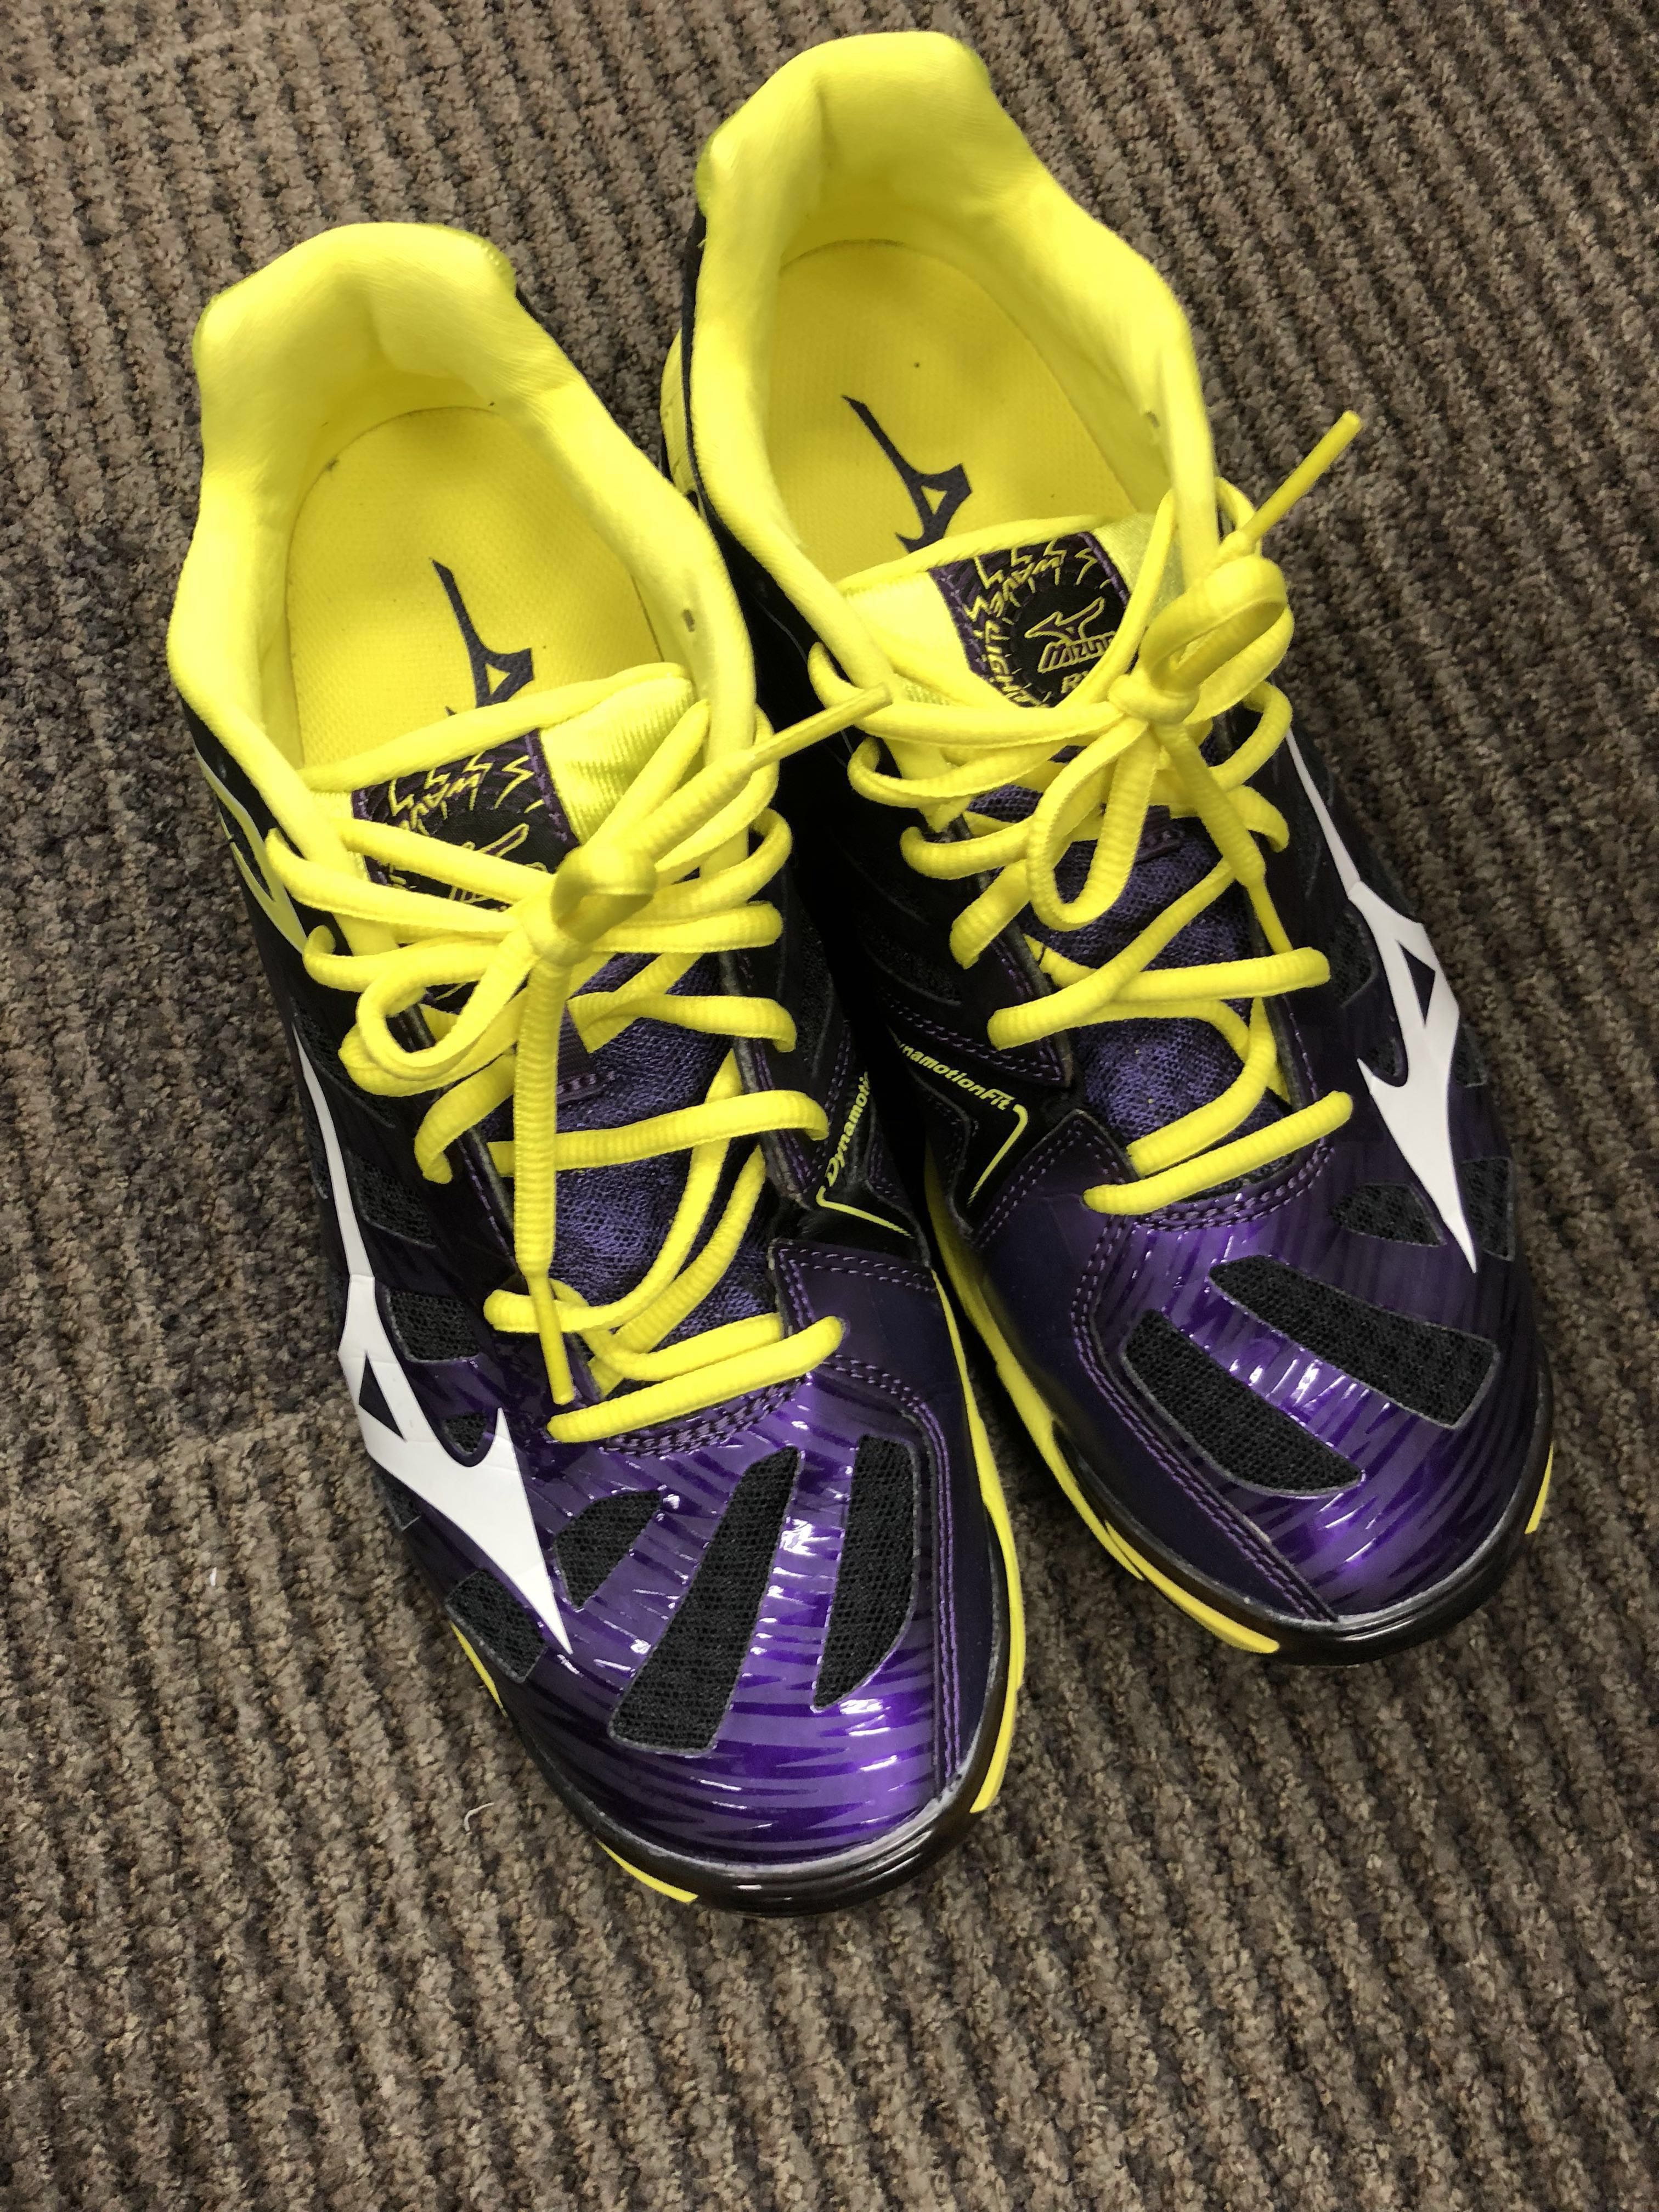 mizuno yellow volleyball shoes